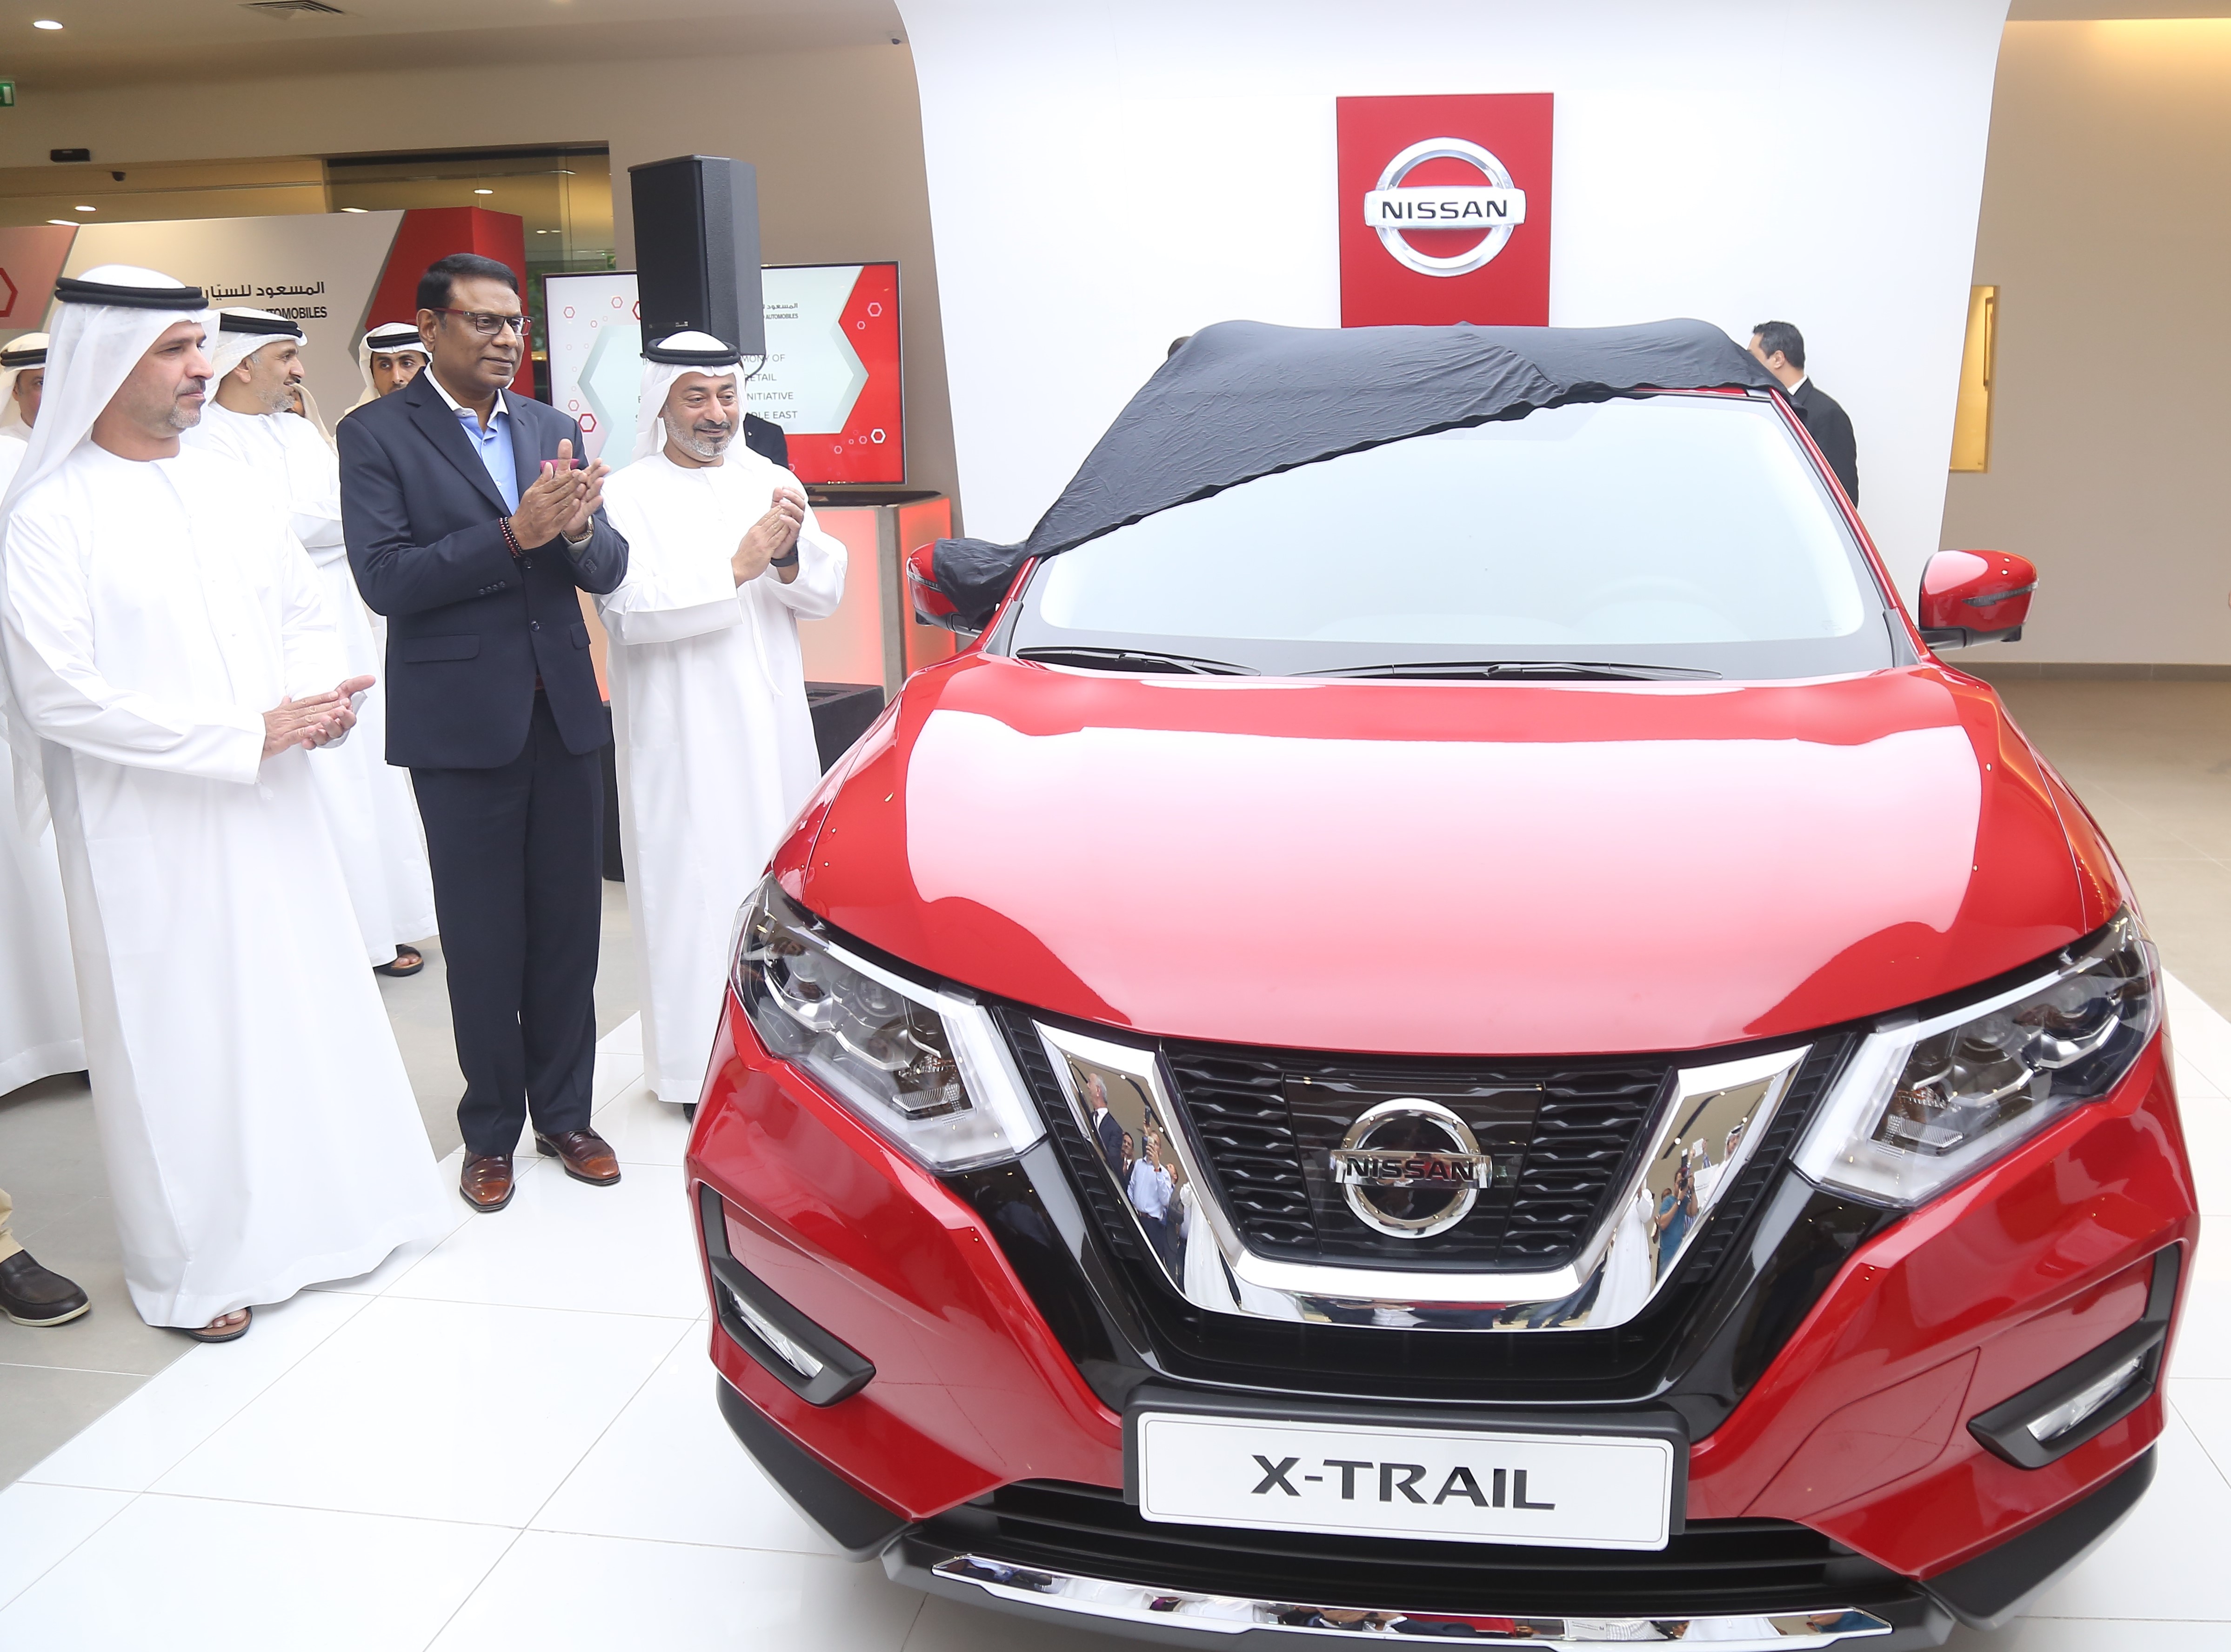 Al Masaood Automobiles Company Inaugurates the First State of the Art Retail Concept Nissan Showroom in the Region